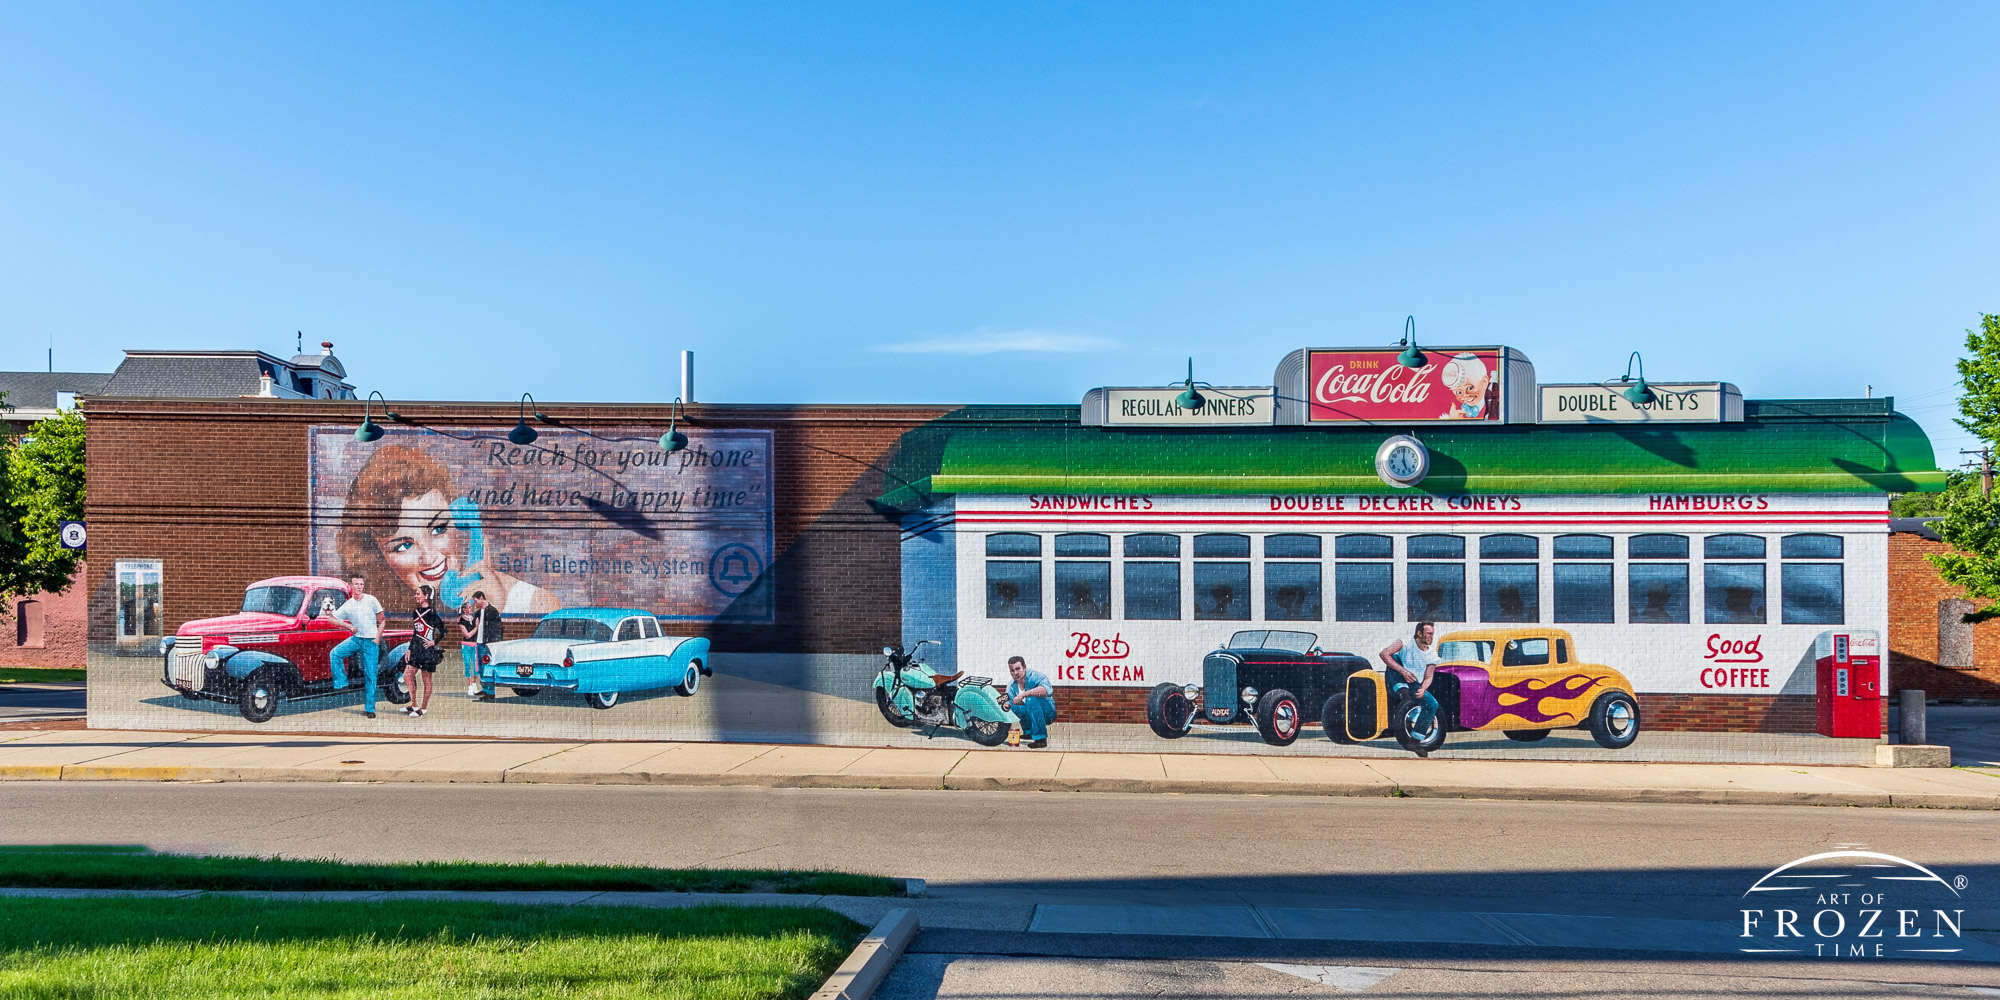 A panorama of an Eric Henn Mural showing 1950s life in front of a classic diner complete with roadsters, motorcycles and young adults in conversation